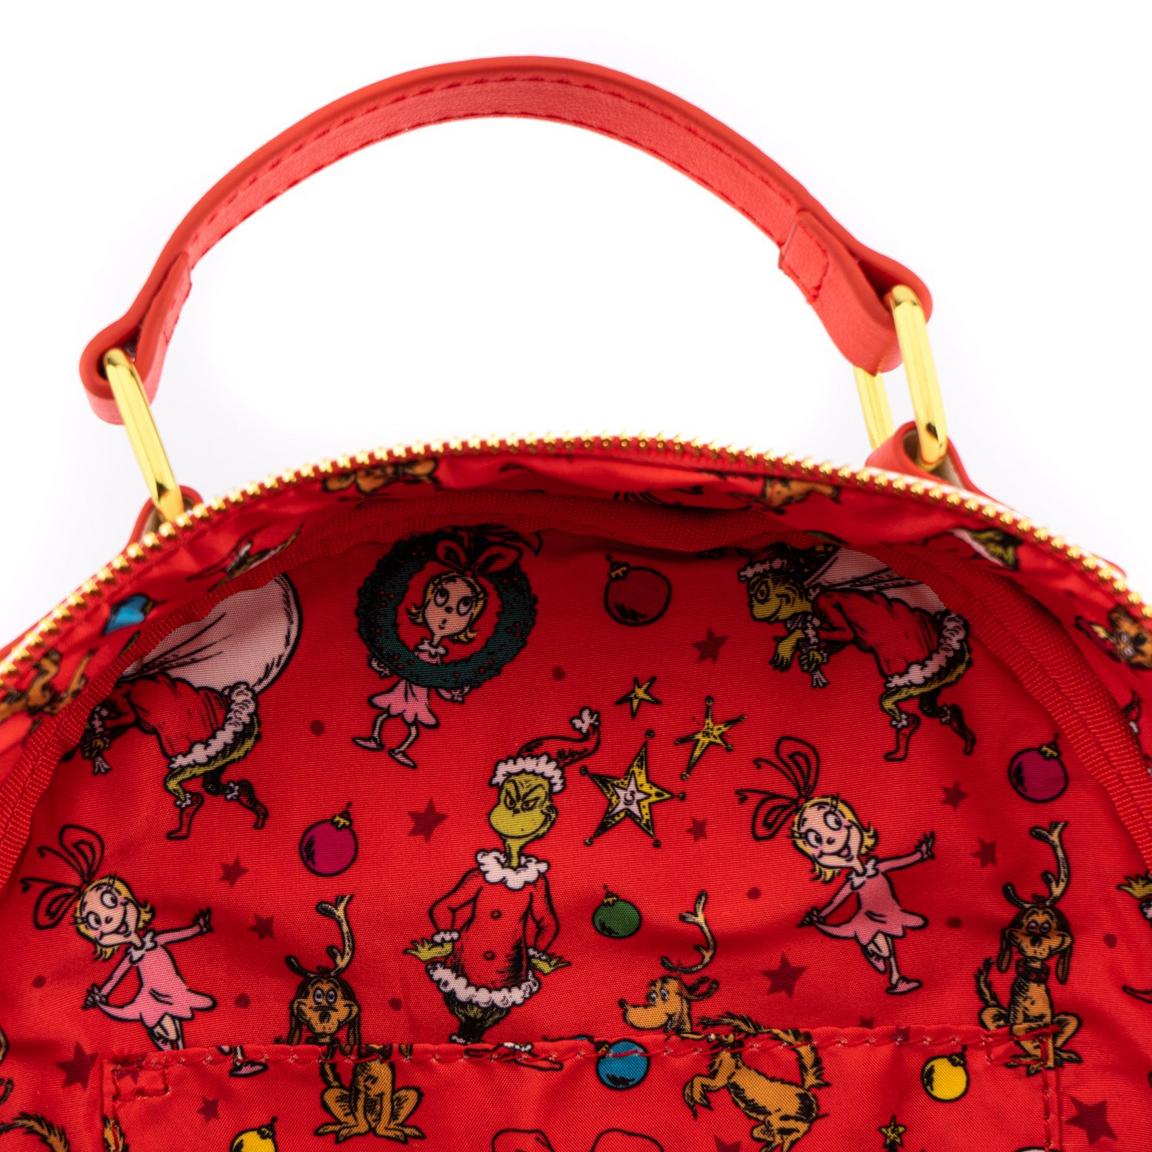 Dr Seuss Loungefly Mini Backpack - How the Grinch Stole Christmas!  Lenticular